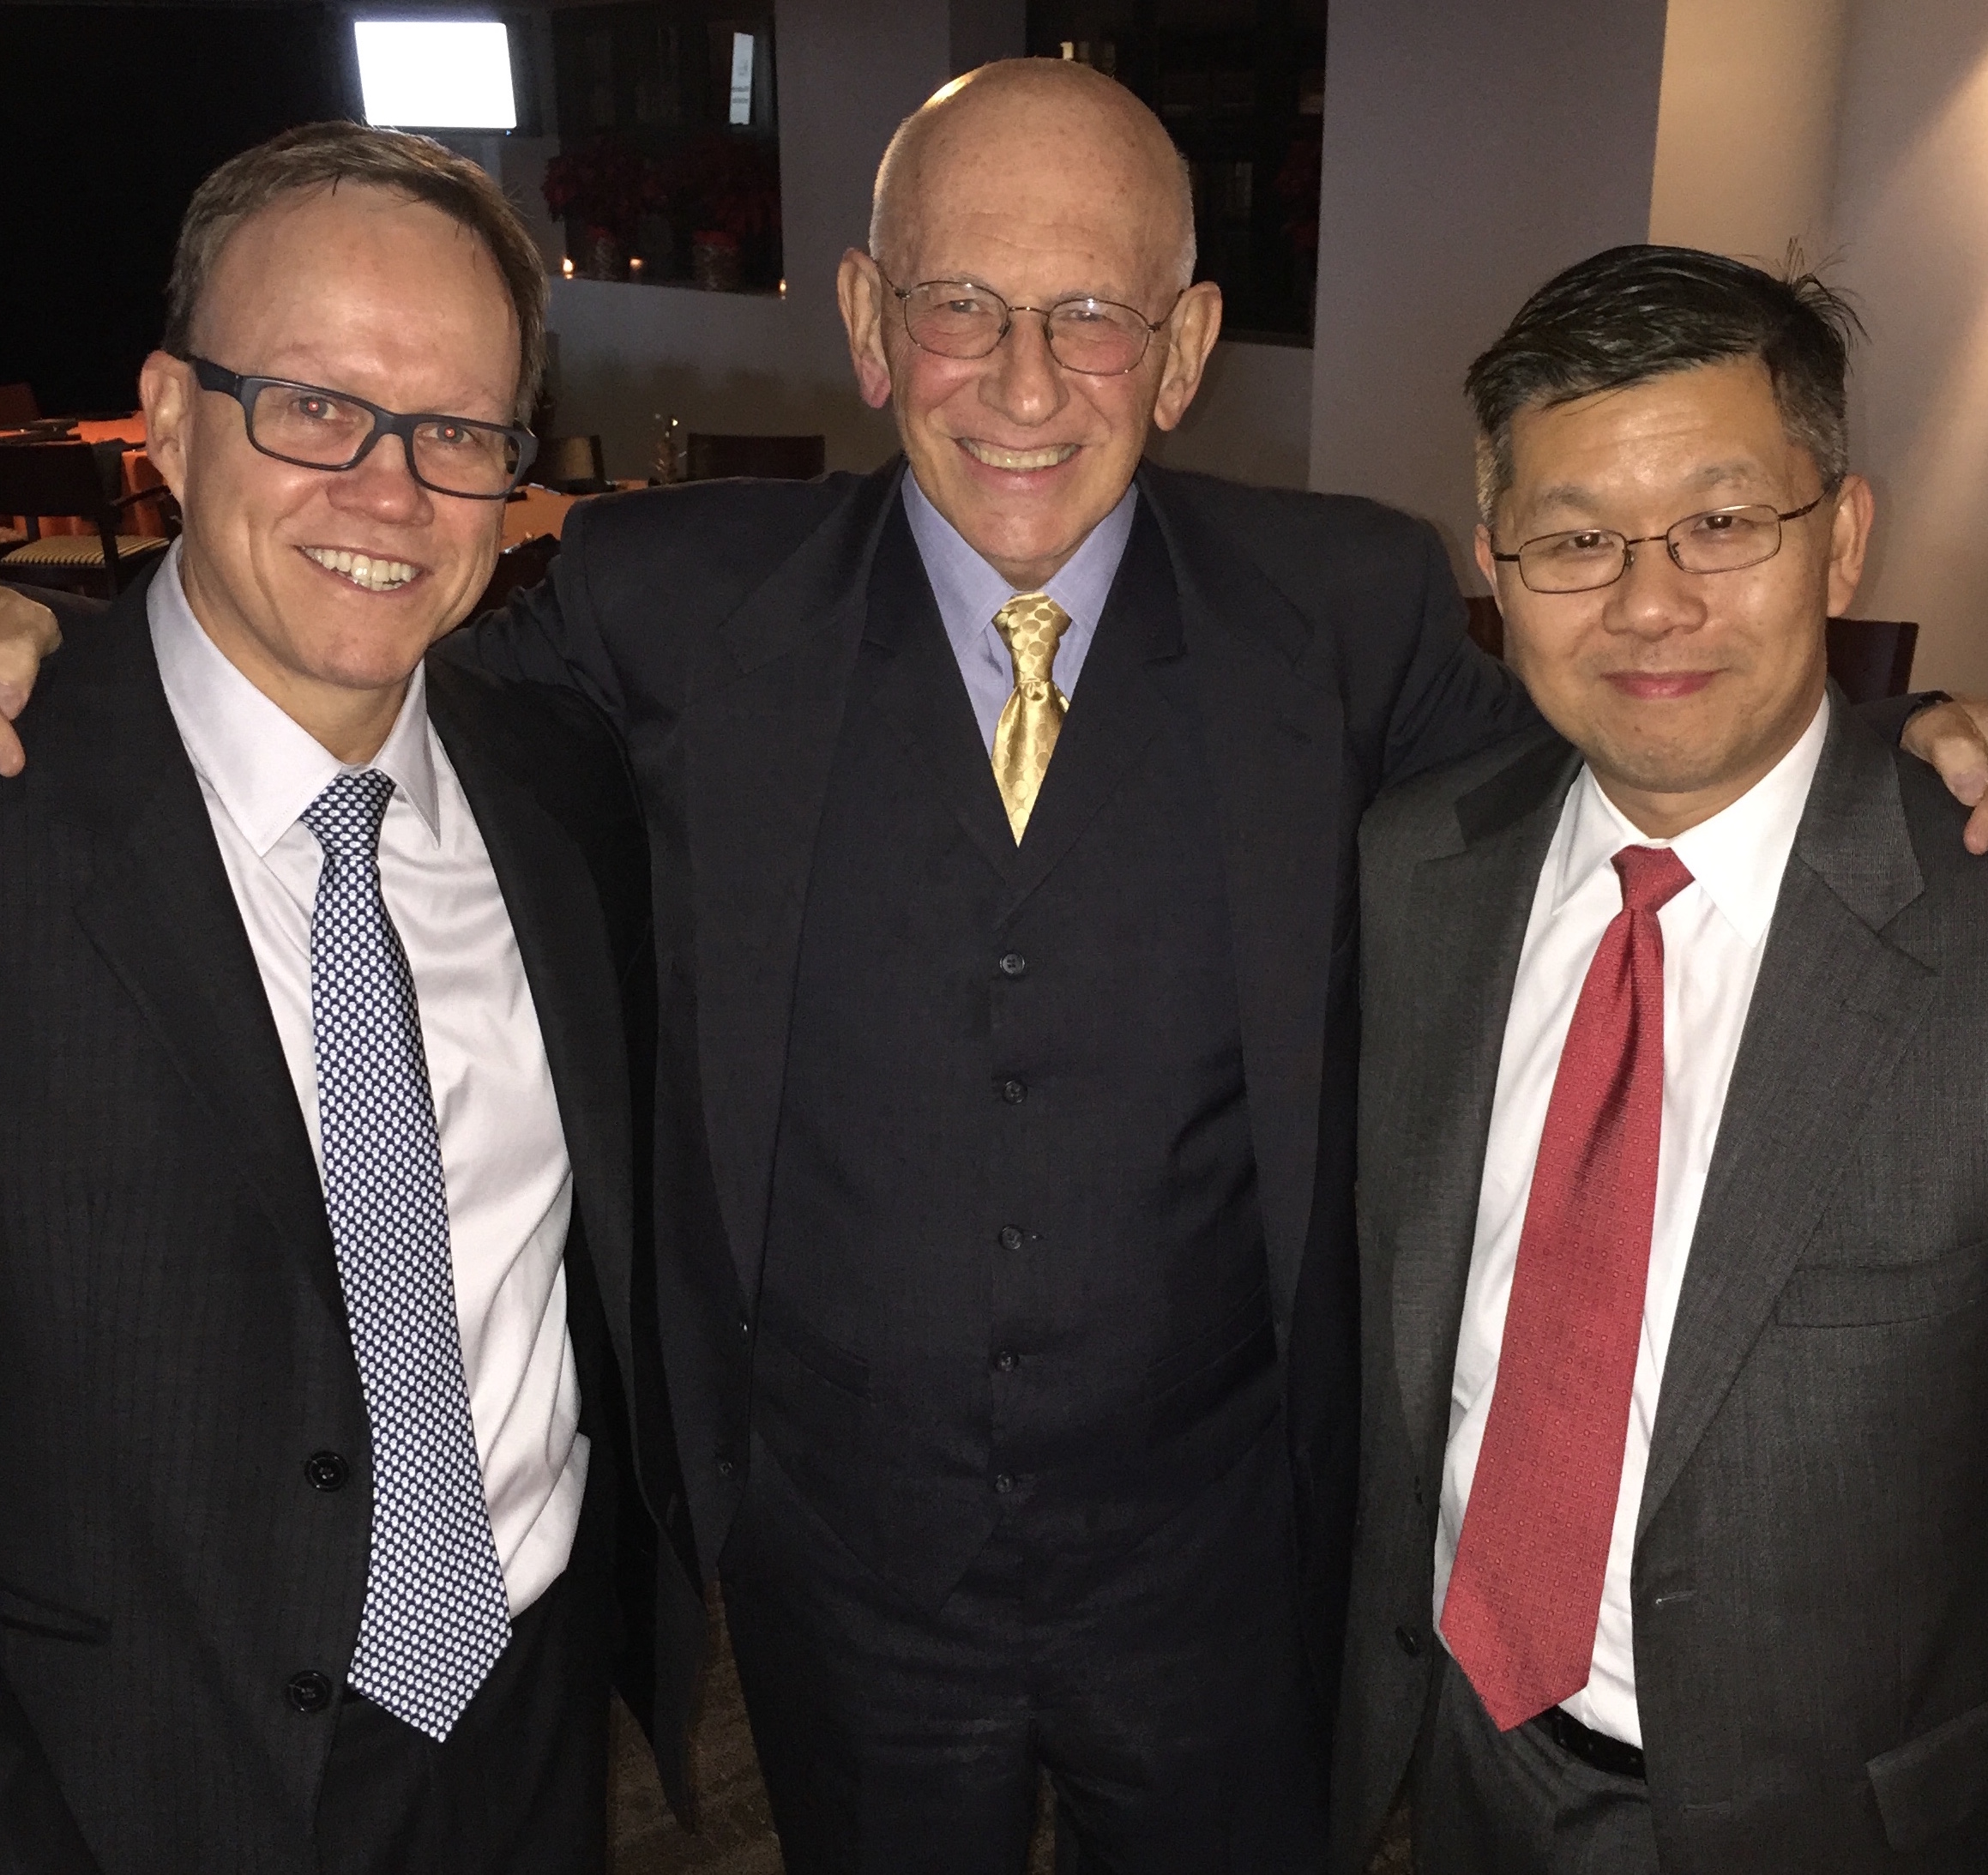 Celebration Honoring William P. Schecter, MD, Professor Emeritus of Surgery at UCSF and SFGH